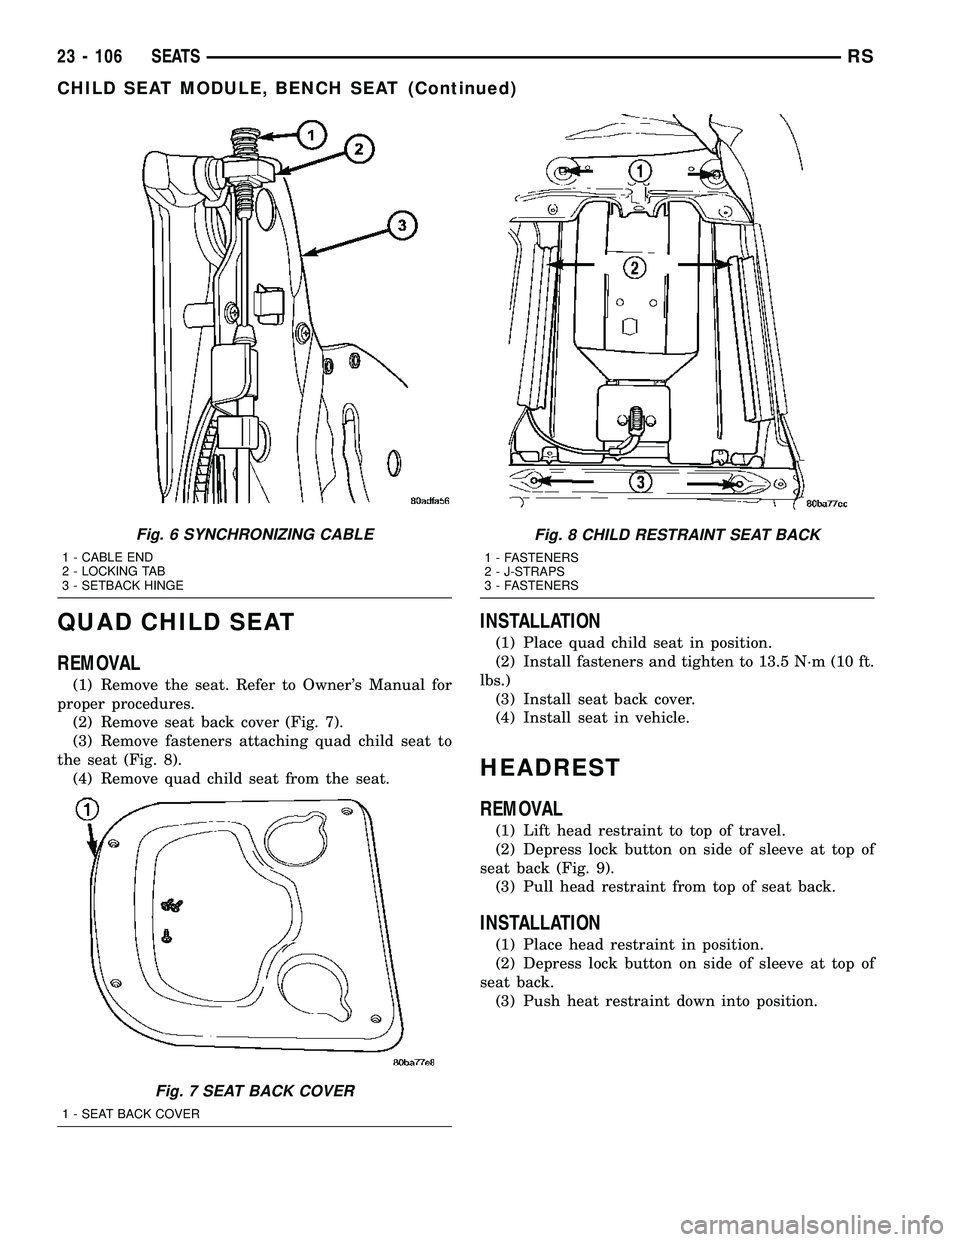 CHRYSLER VOYAGER 2005 User Guide QUAD CHILD SEAT
REMOVAL
(1) Remove the seat. Refer to Owners Manual for
proper procedures.
(2) Remove seat back cover (Fig. 7).
(3) Remove fasteners attaching quad child seat to
the seat (Fig. 8).
(4